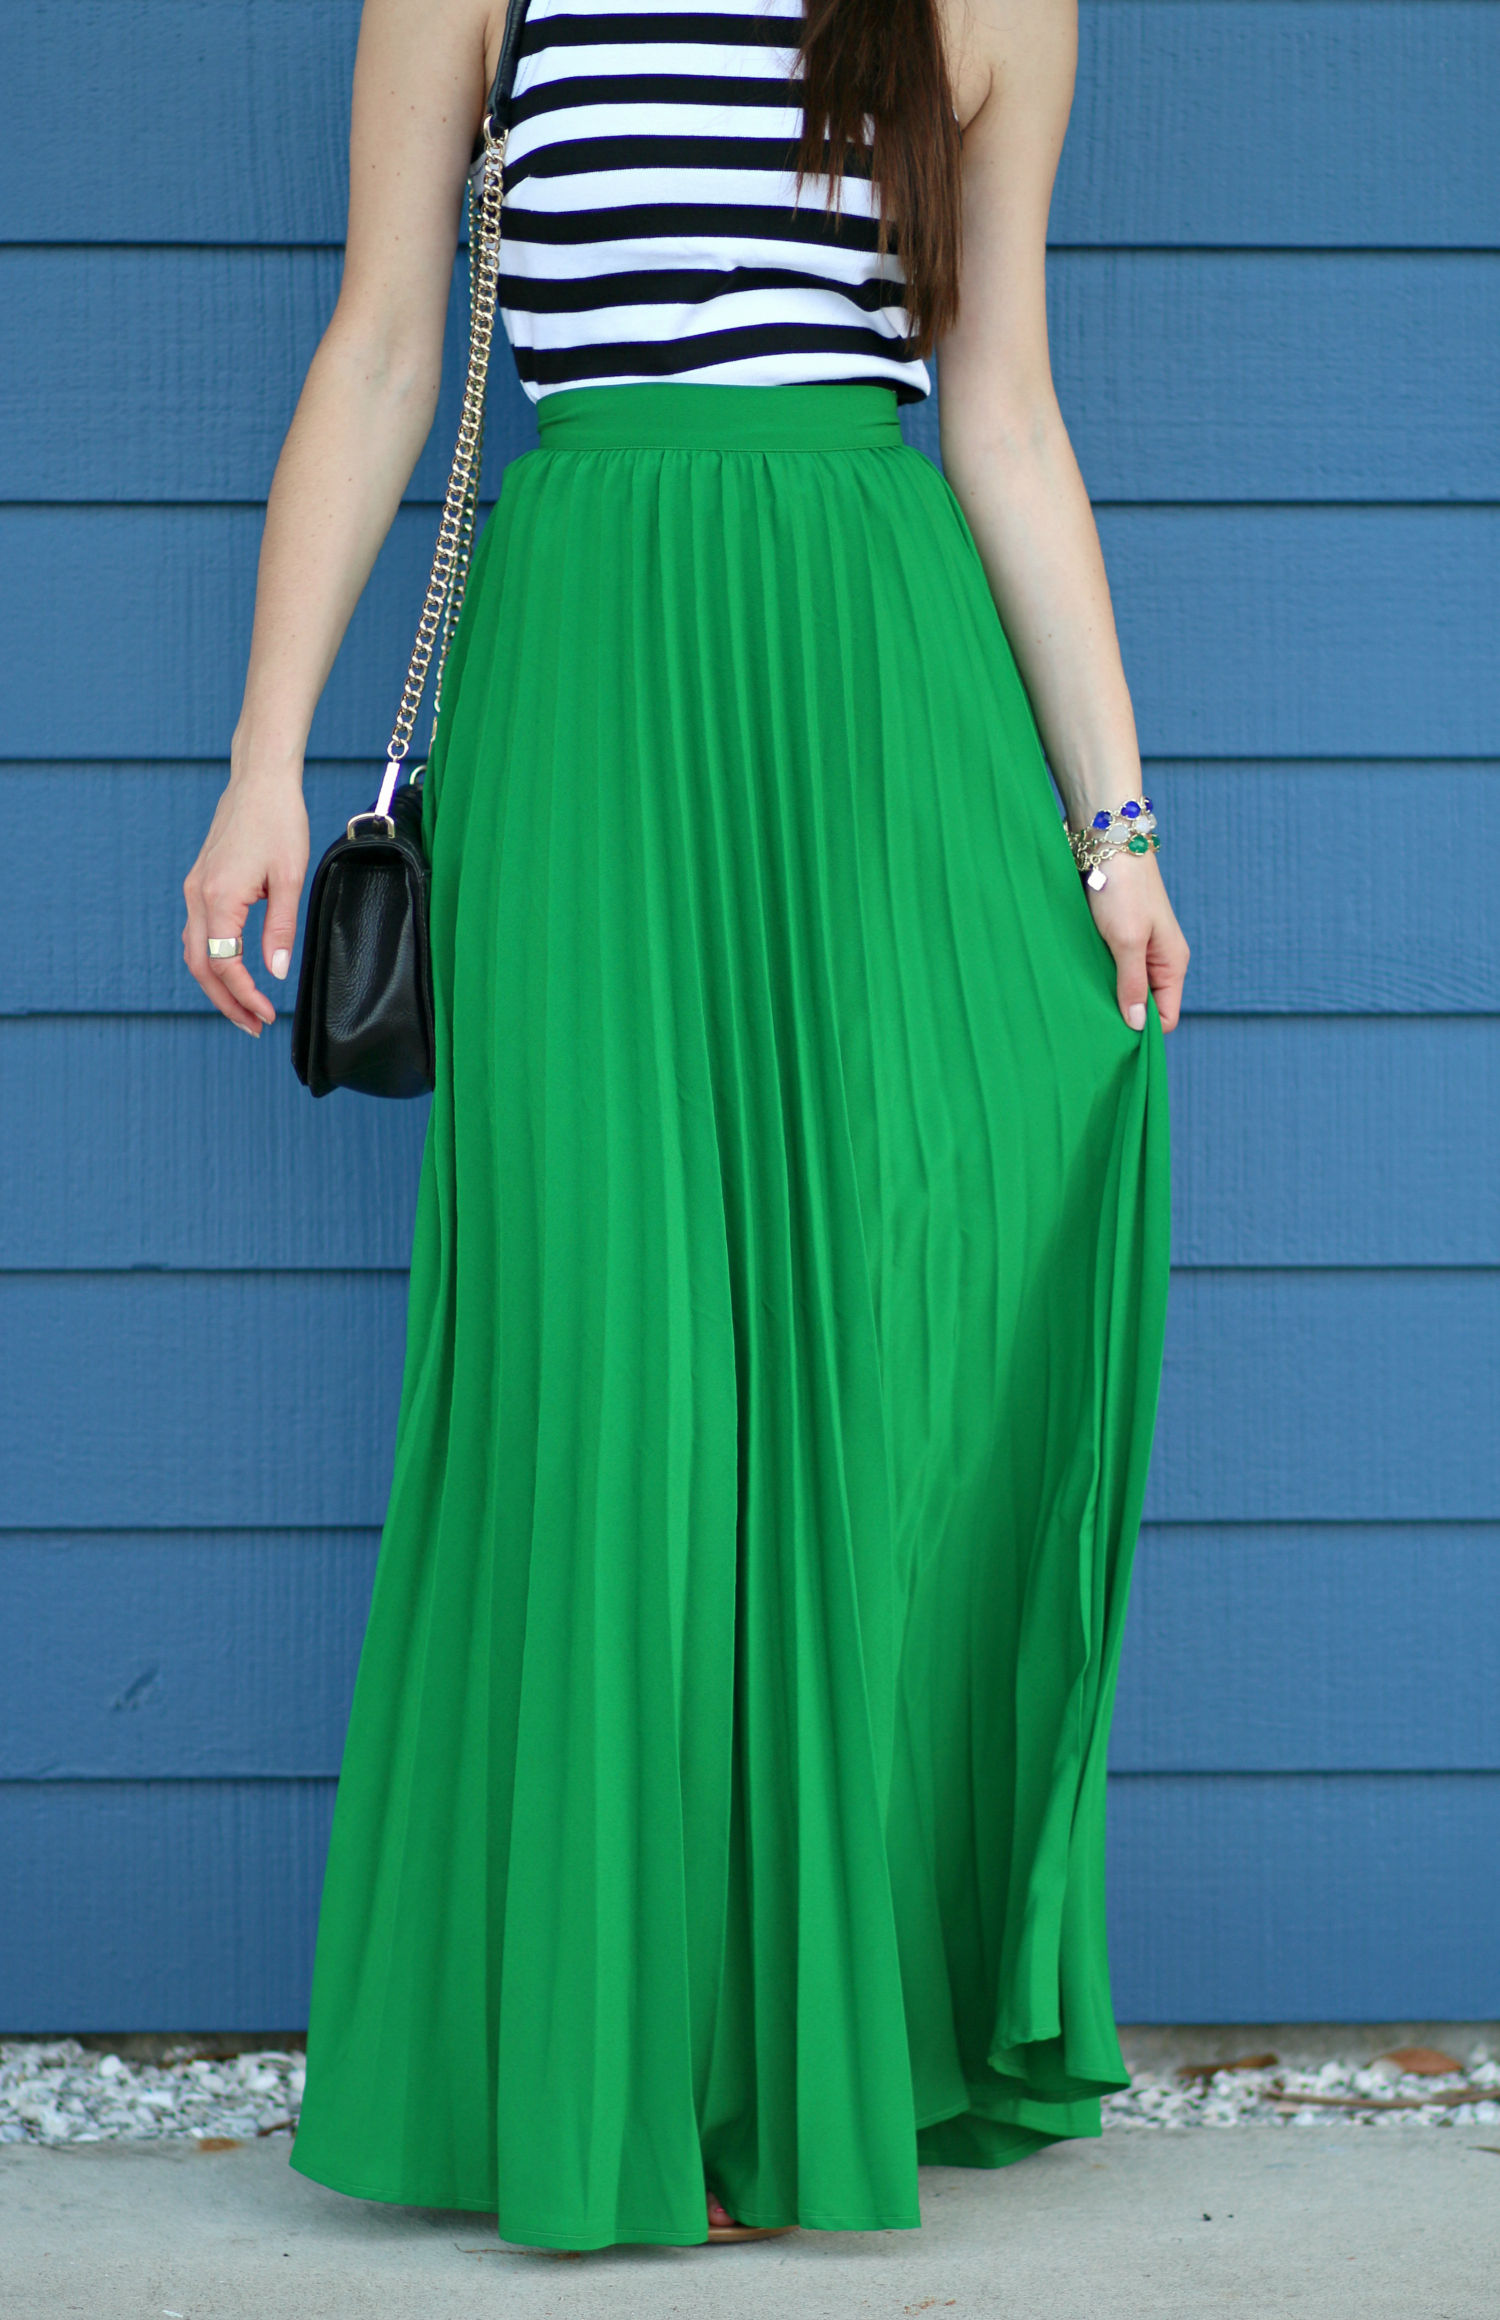 Green pleated maxi skirt from SPleated green maxi skirt from SheInheIn